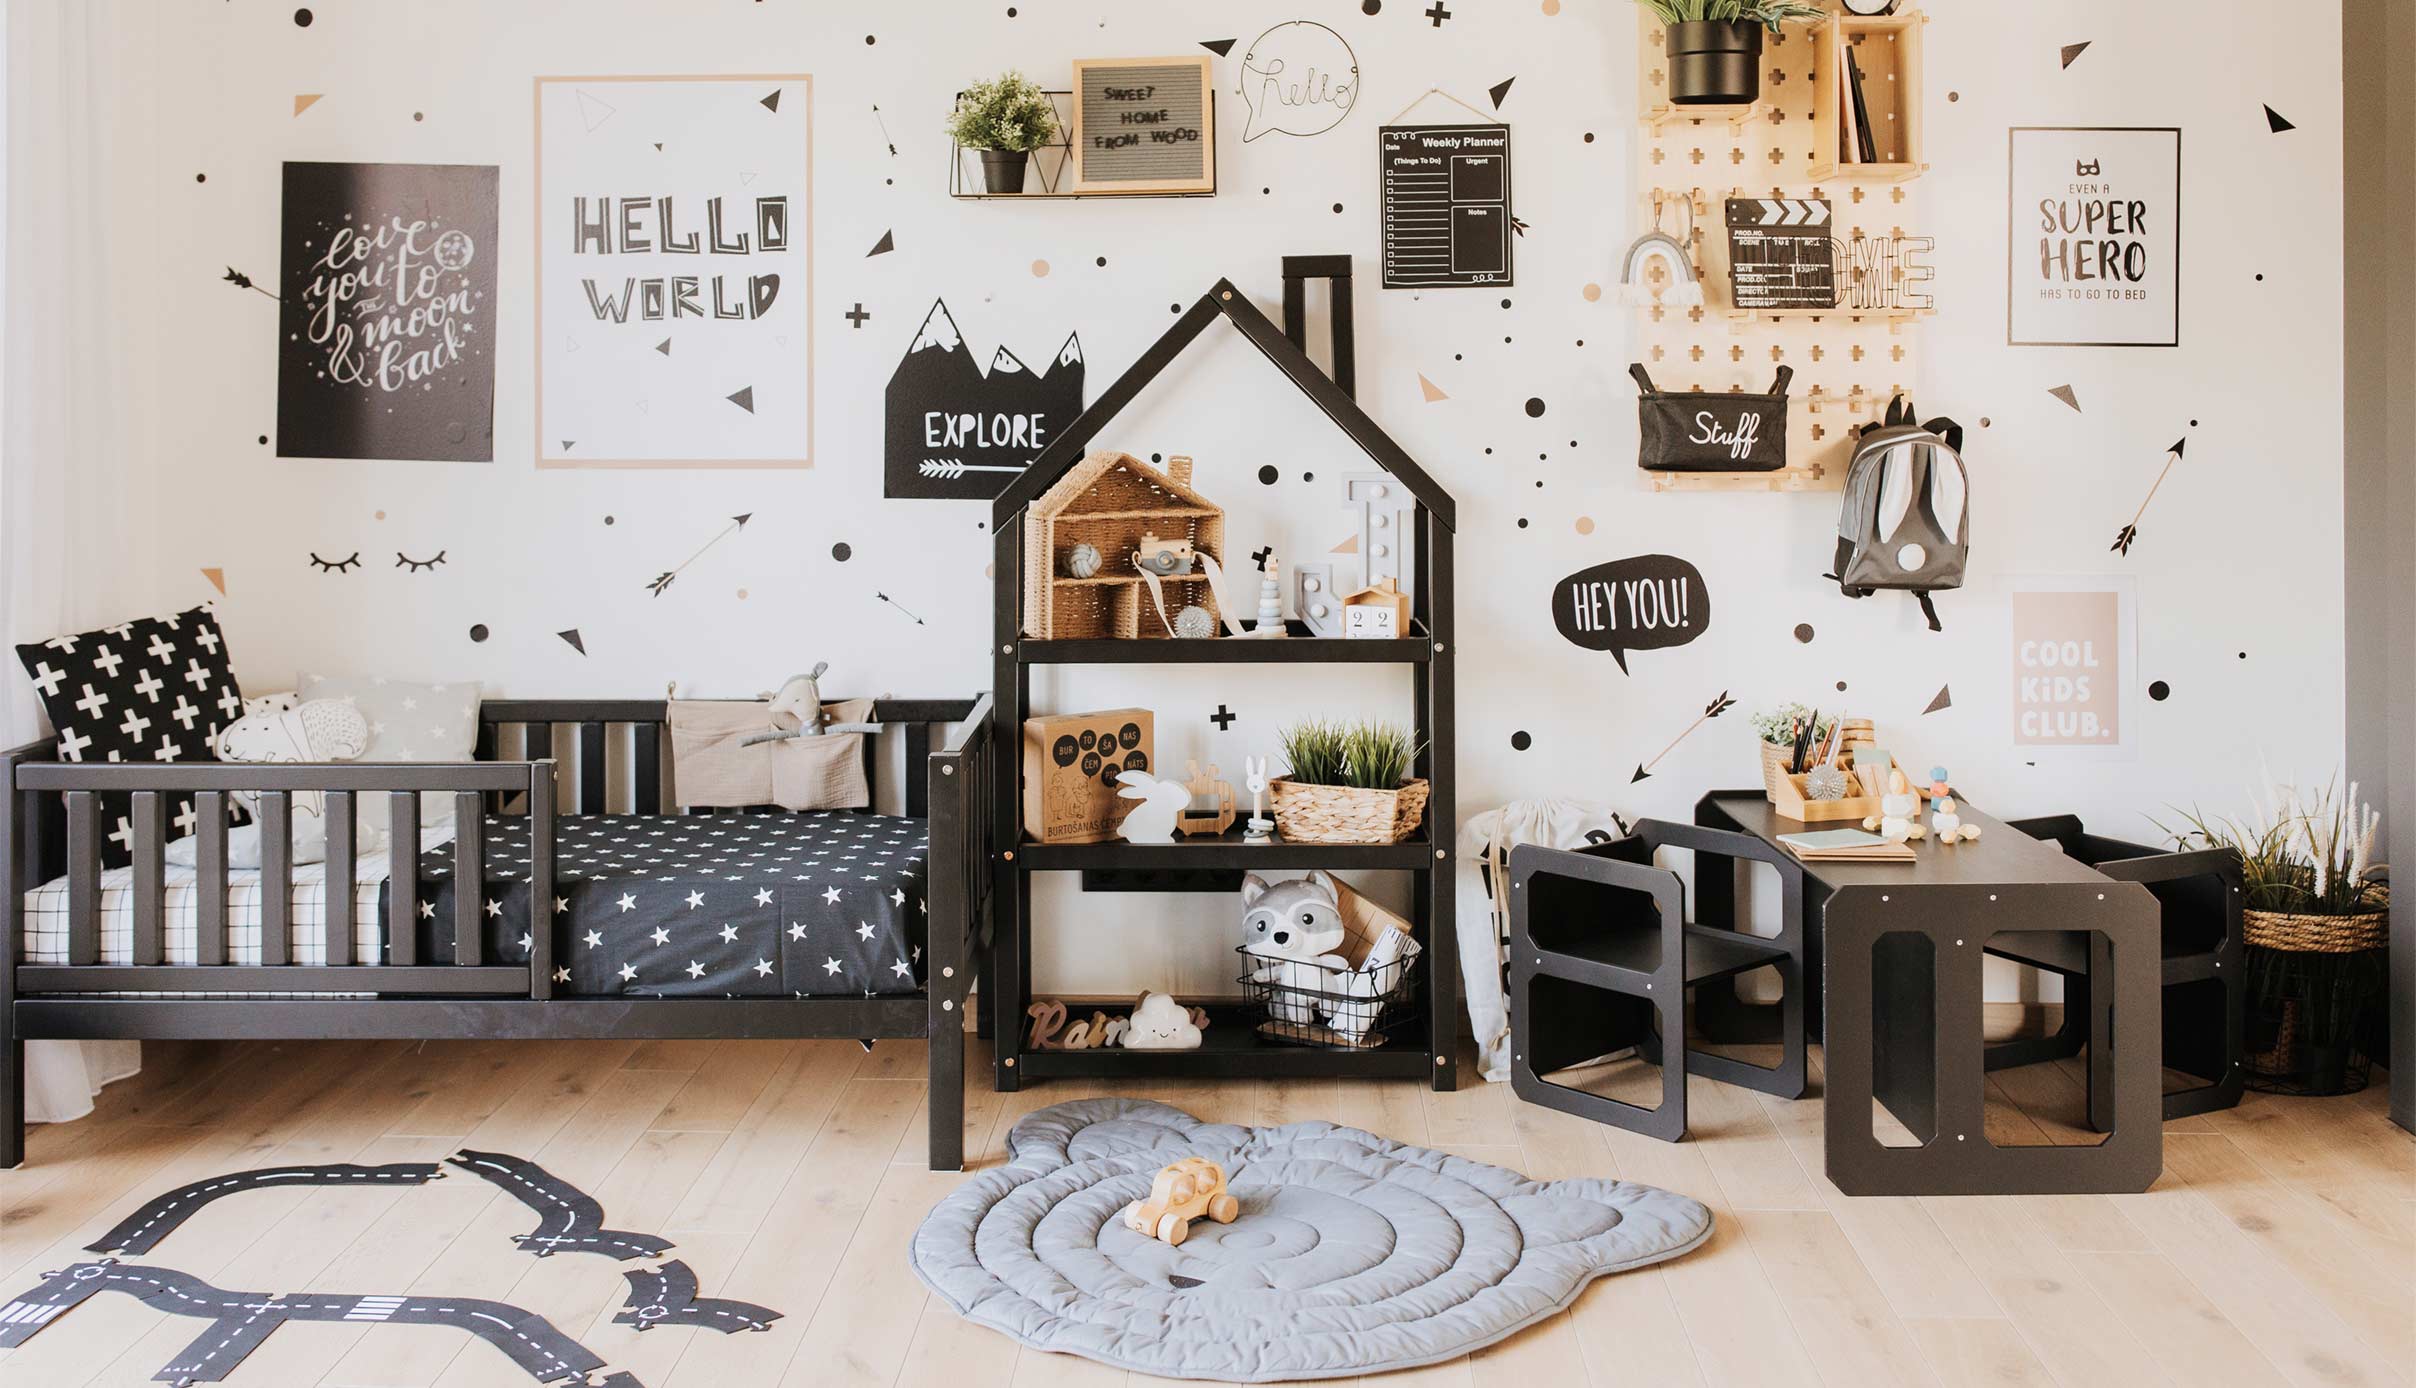 A child's room with black and white decor.